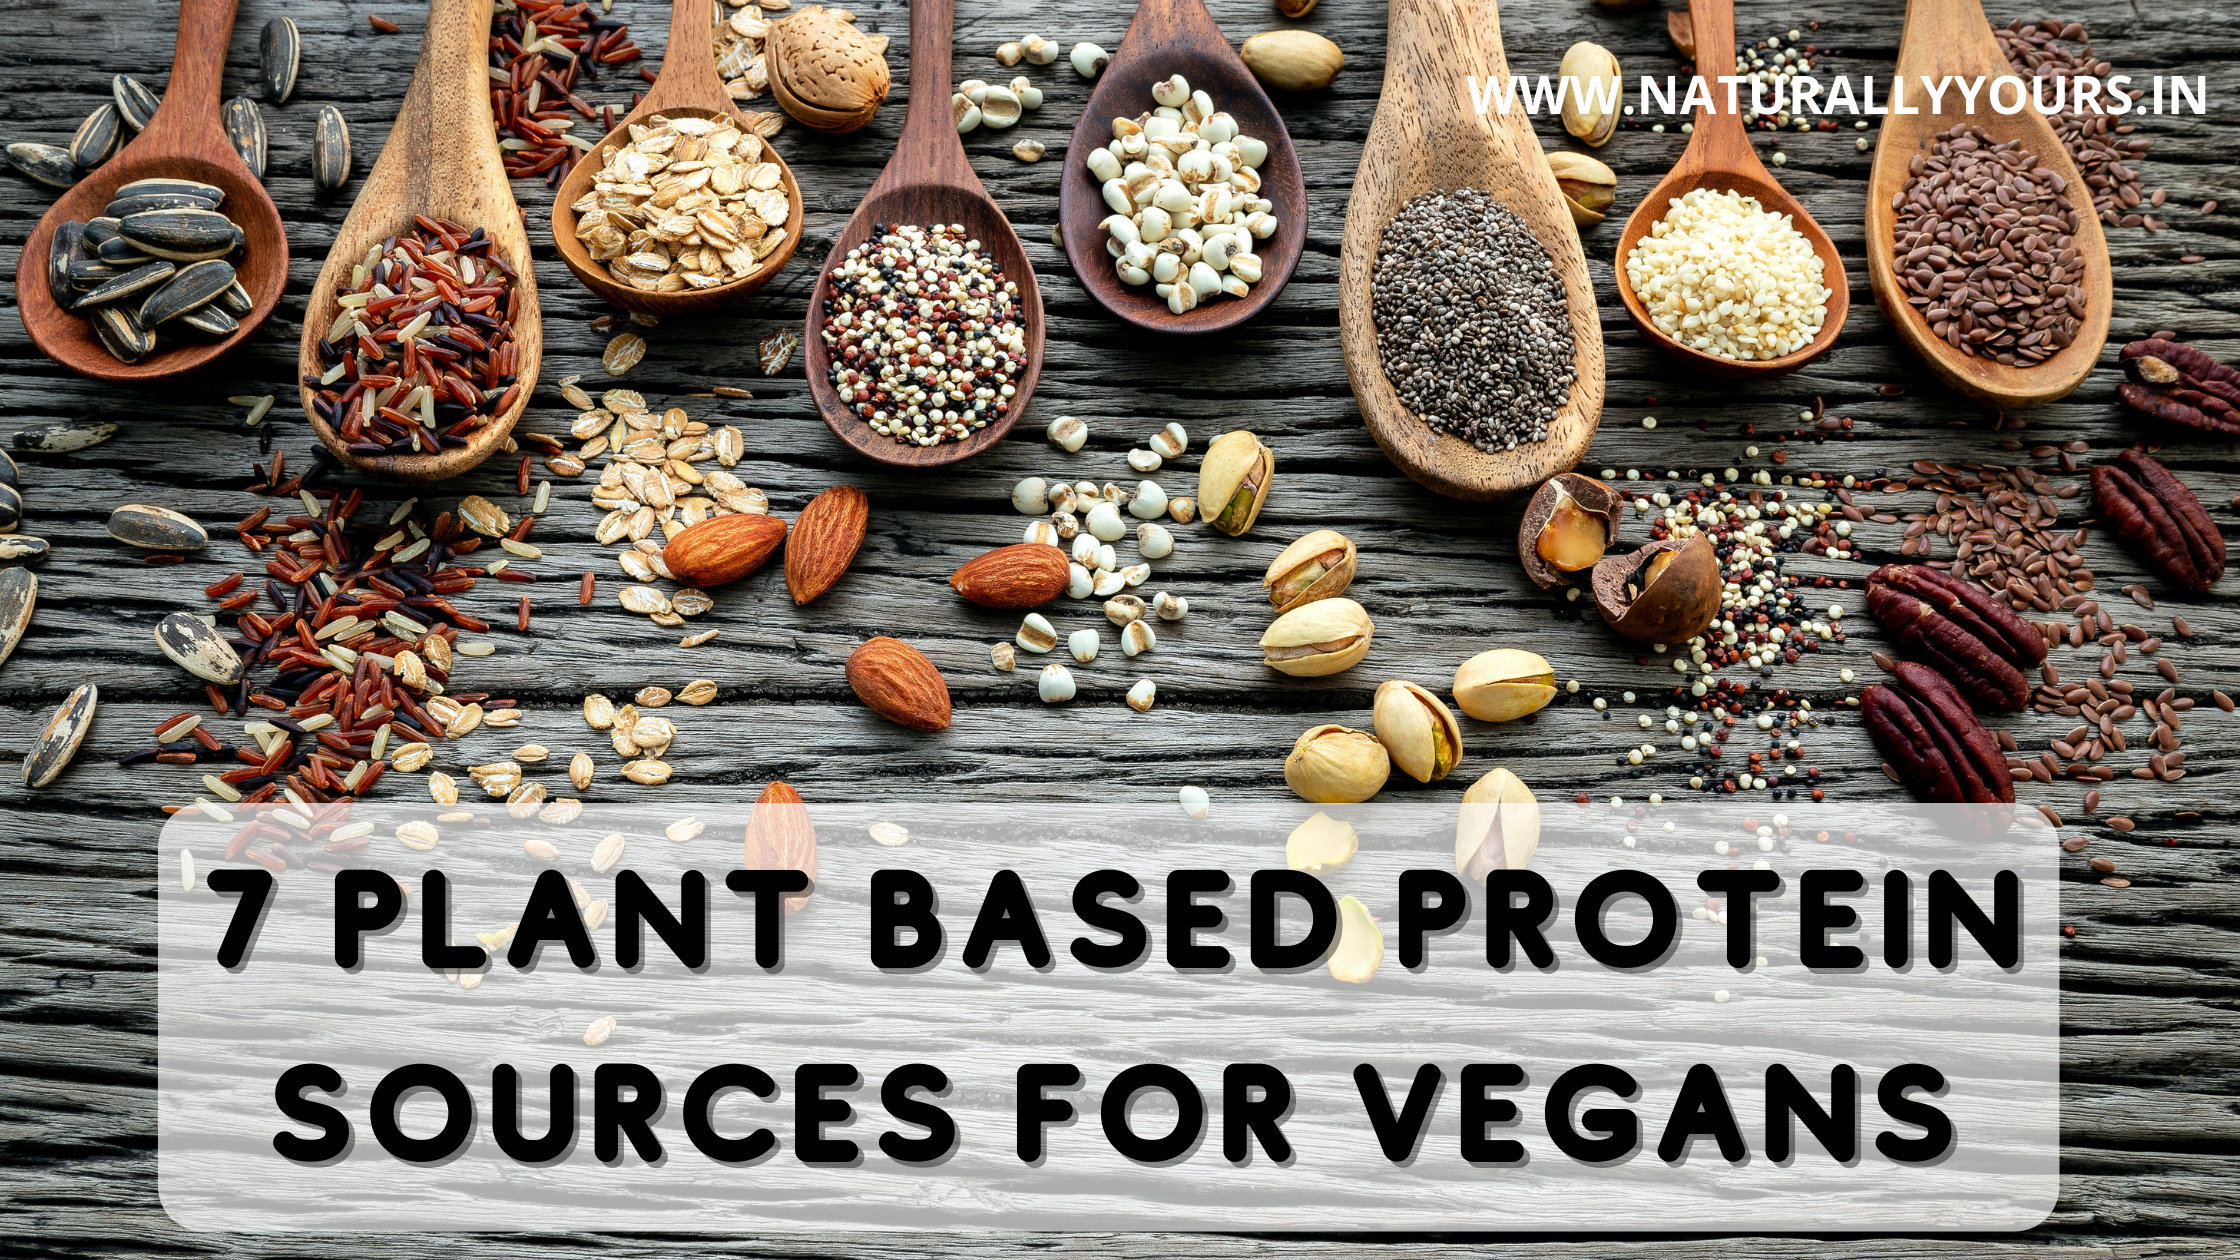 Top sources plant based proteins vegans – Naturally Yours